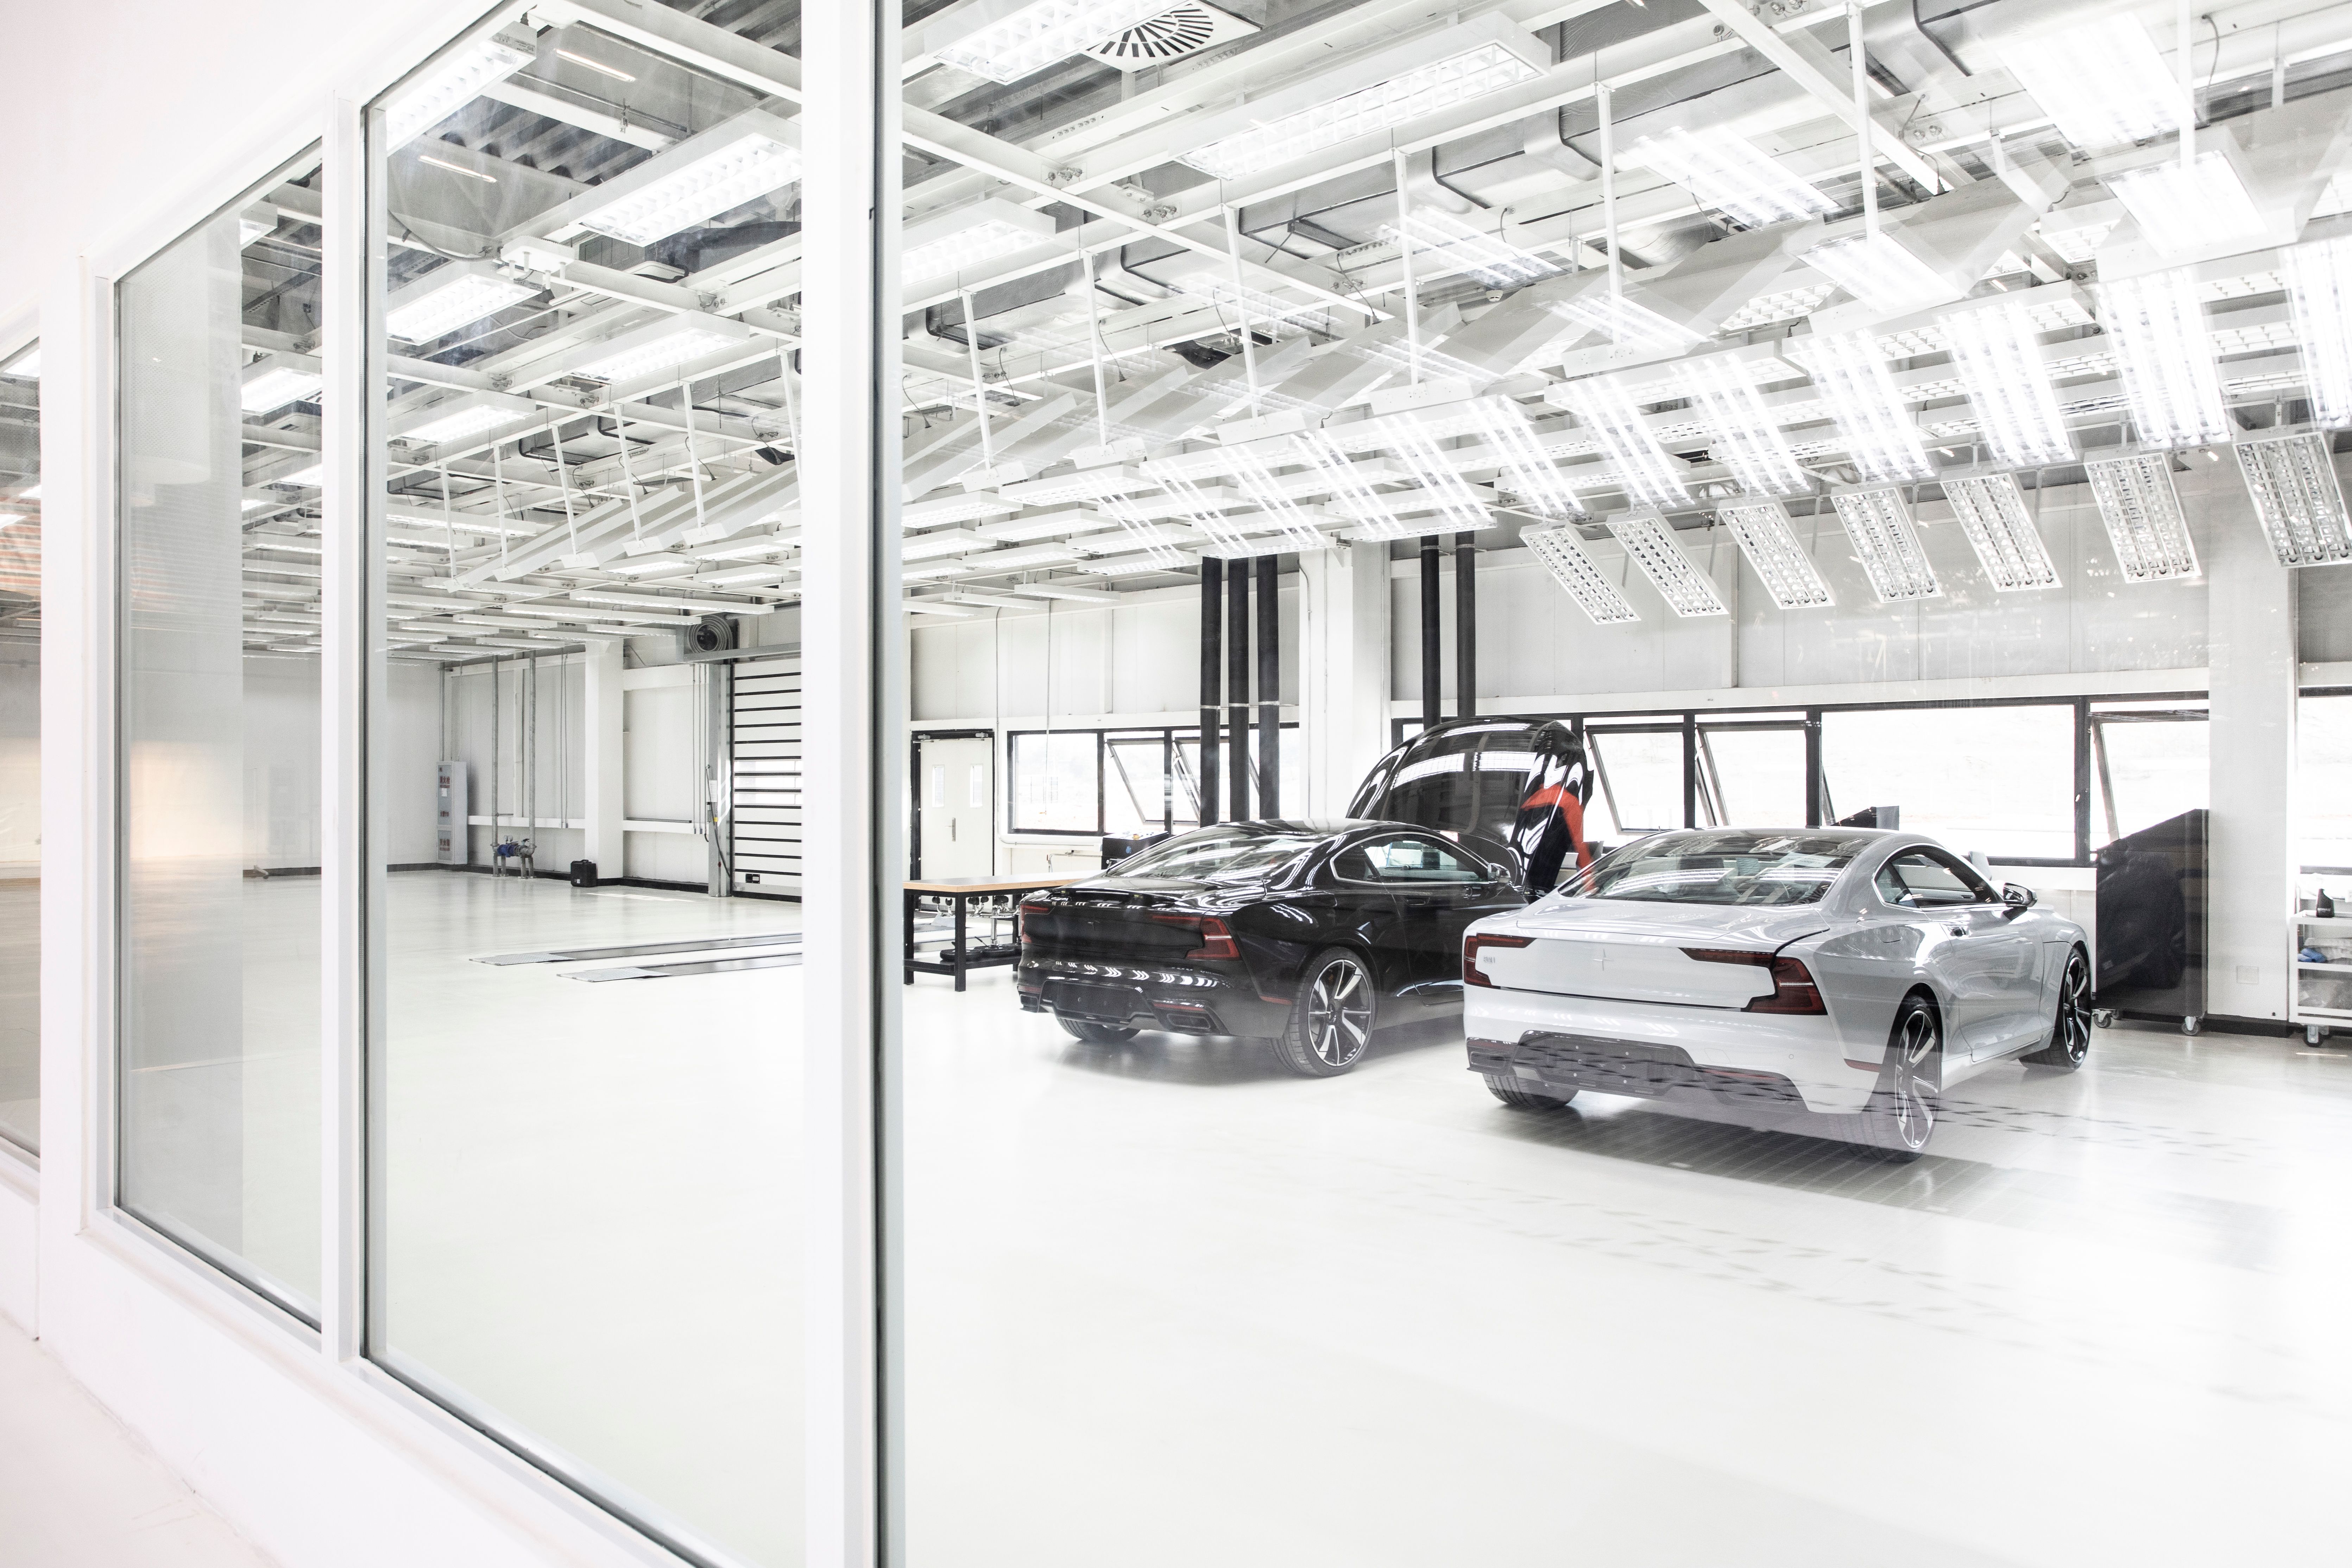 One Black and one white Polestar 2 parked inside a factory